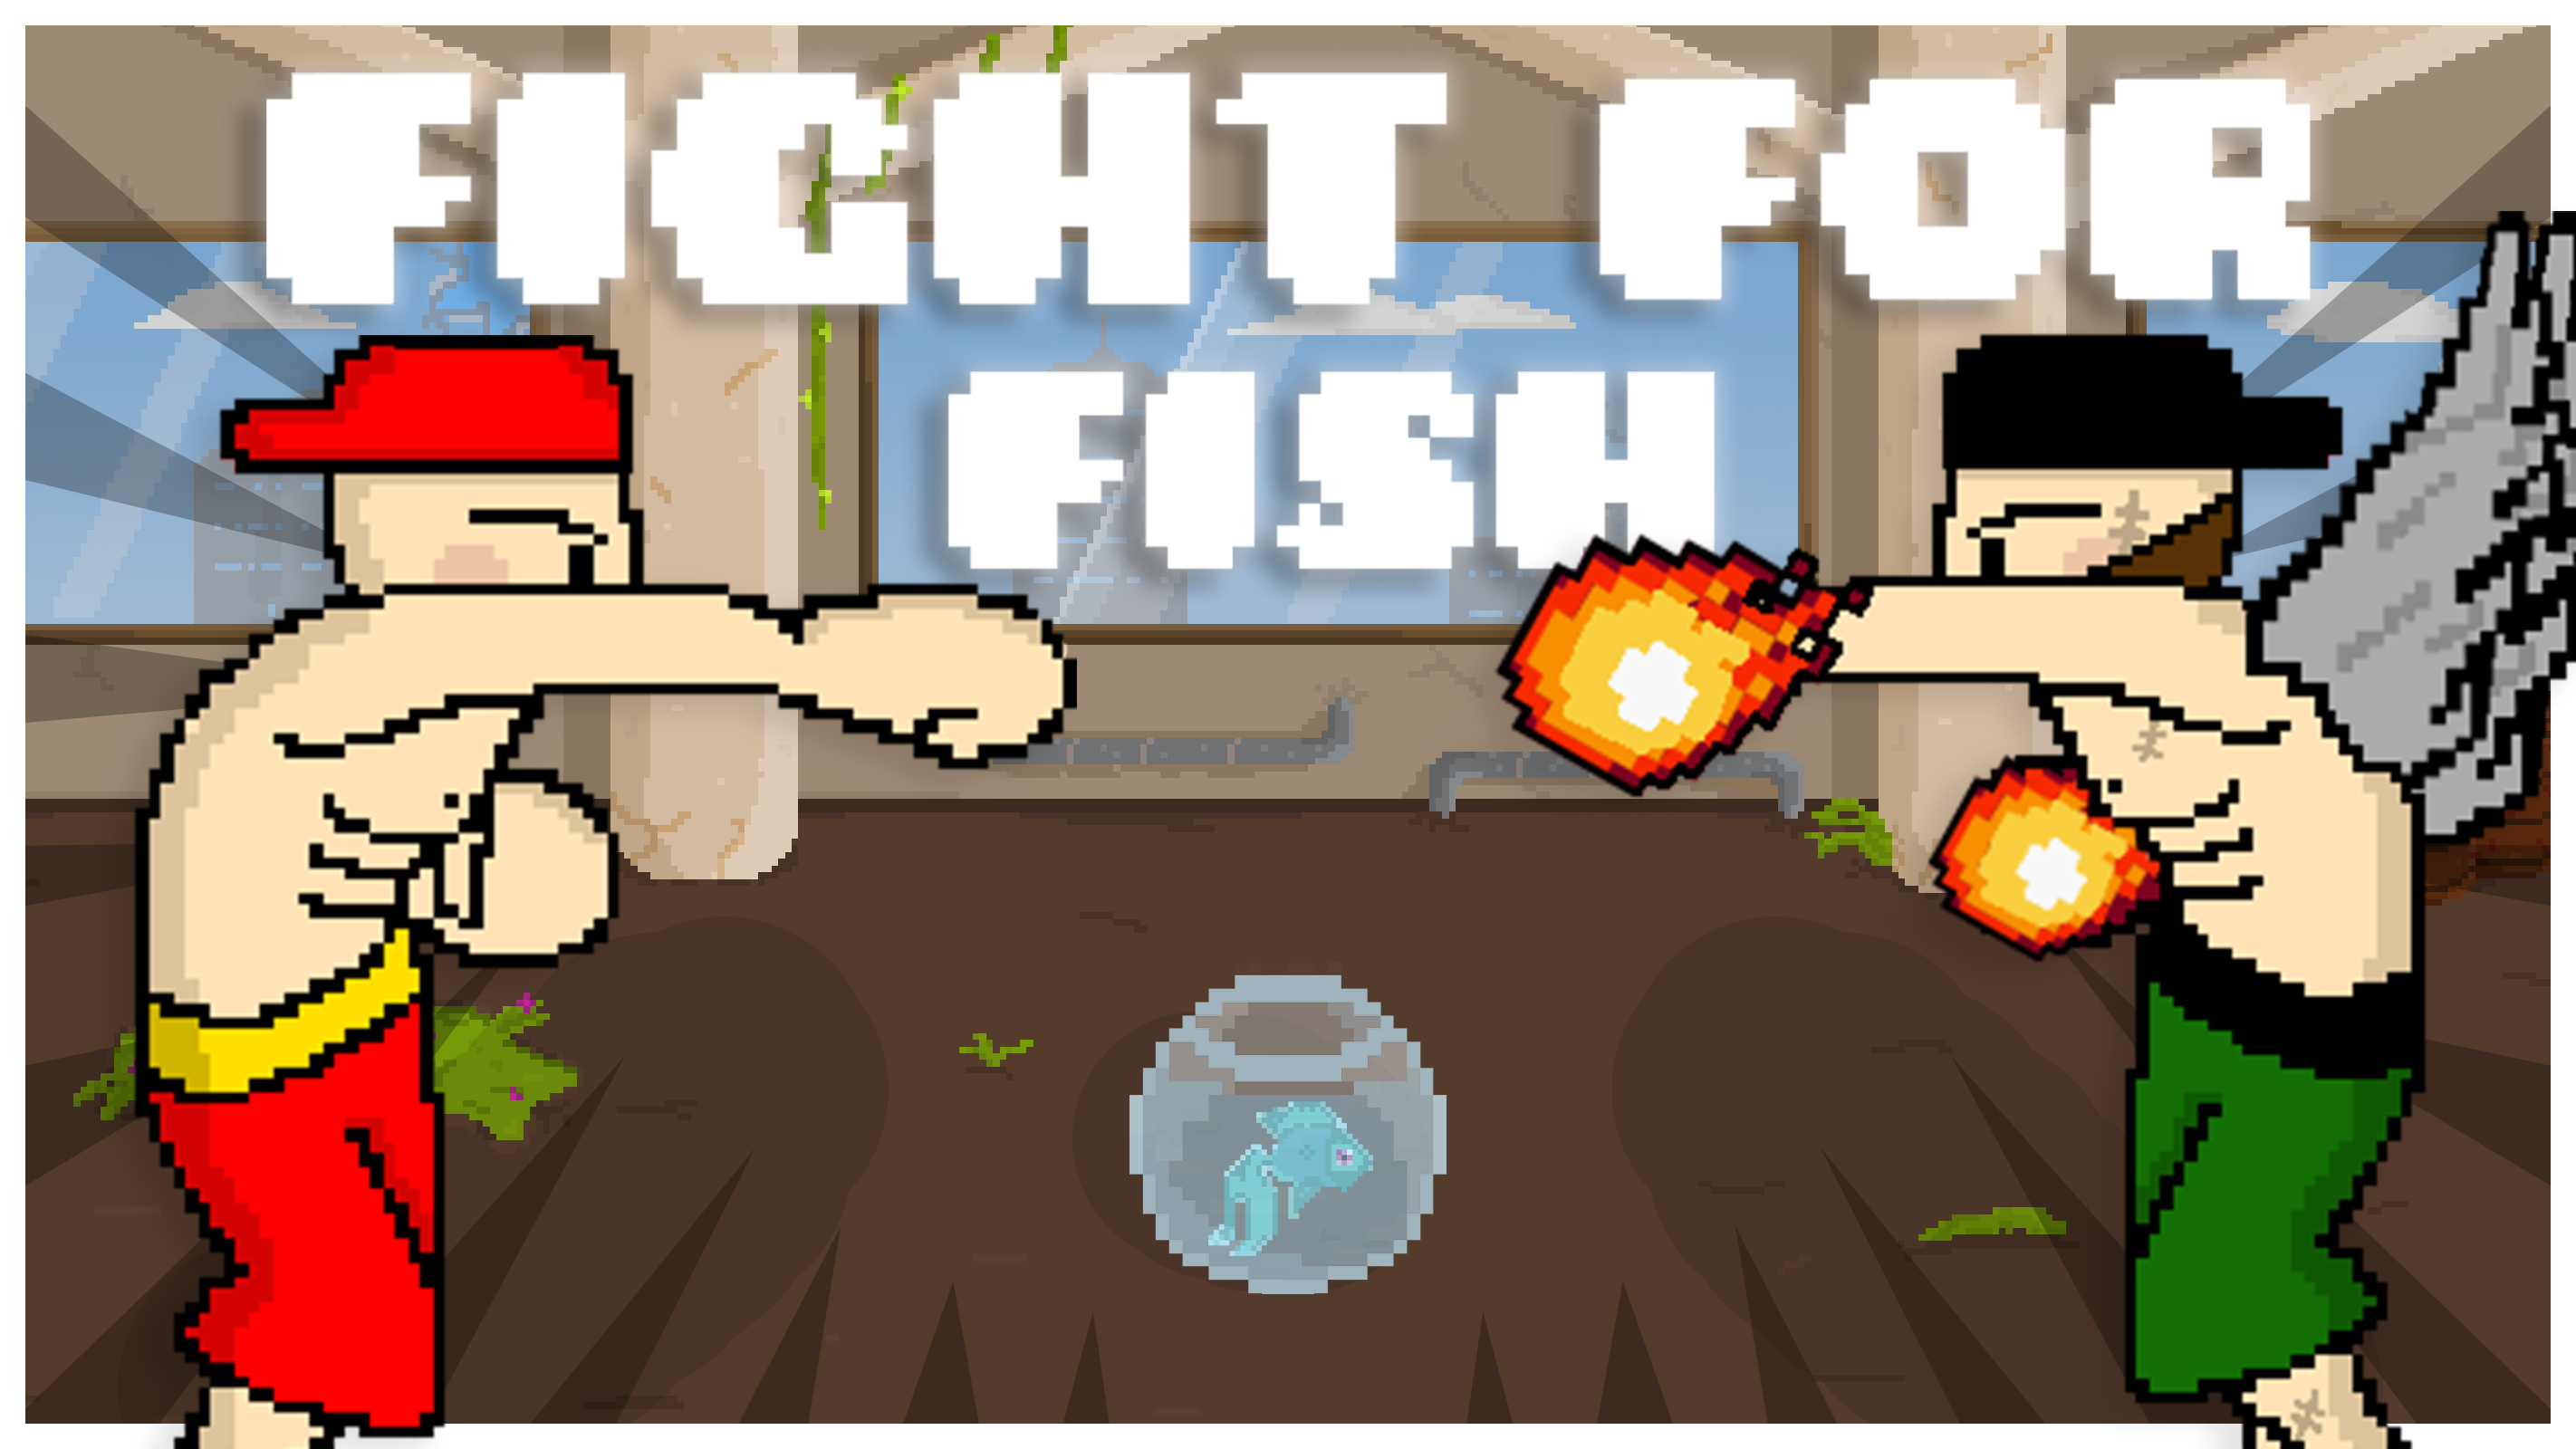 Fight for Fish